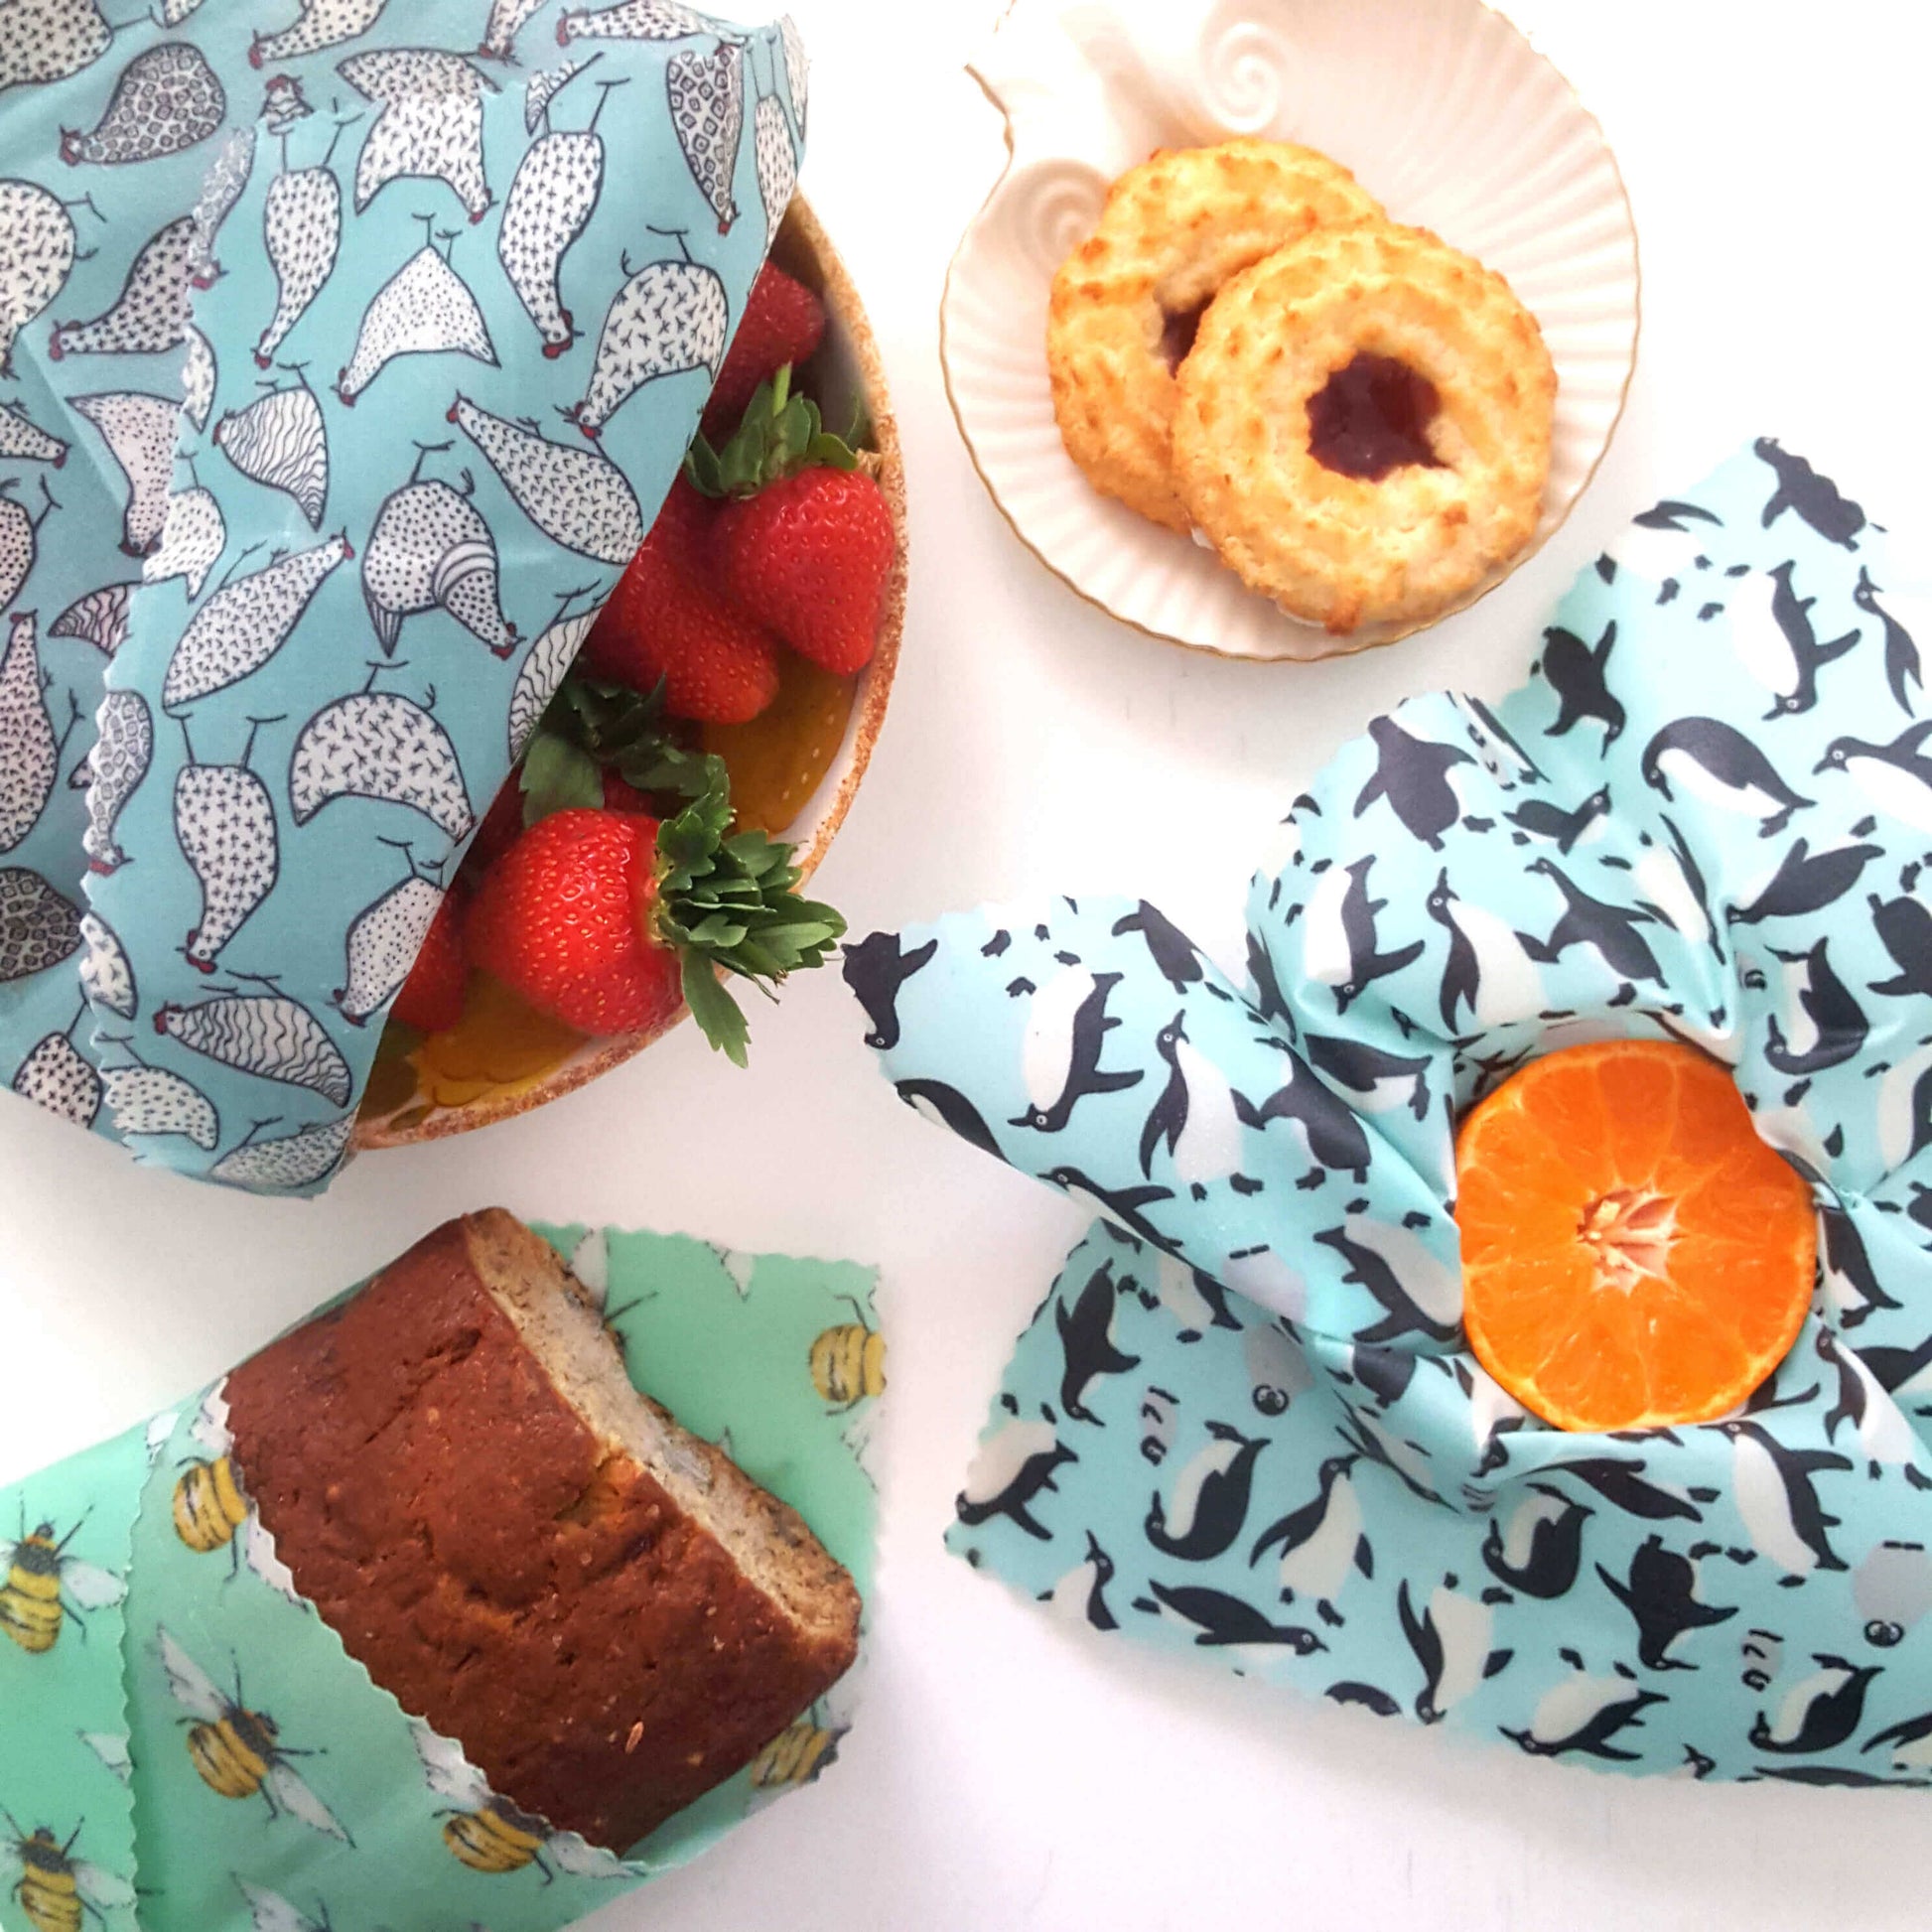 Reusable Beeswax Food Wraps 100% Hand Made in the UK by Honey Bee Good. Earth Kind Classic set of 3 in Penguins, Hens & Bees flatlay